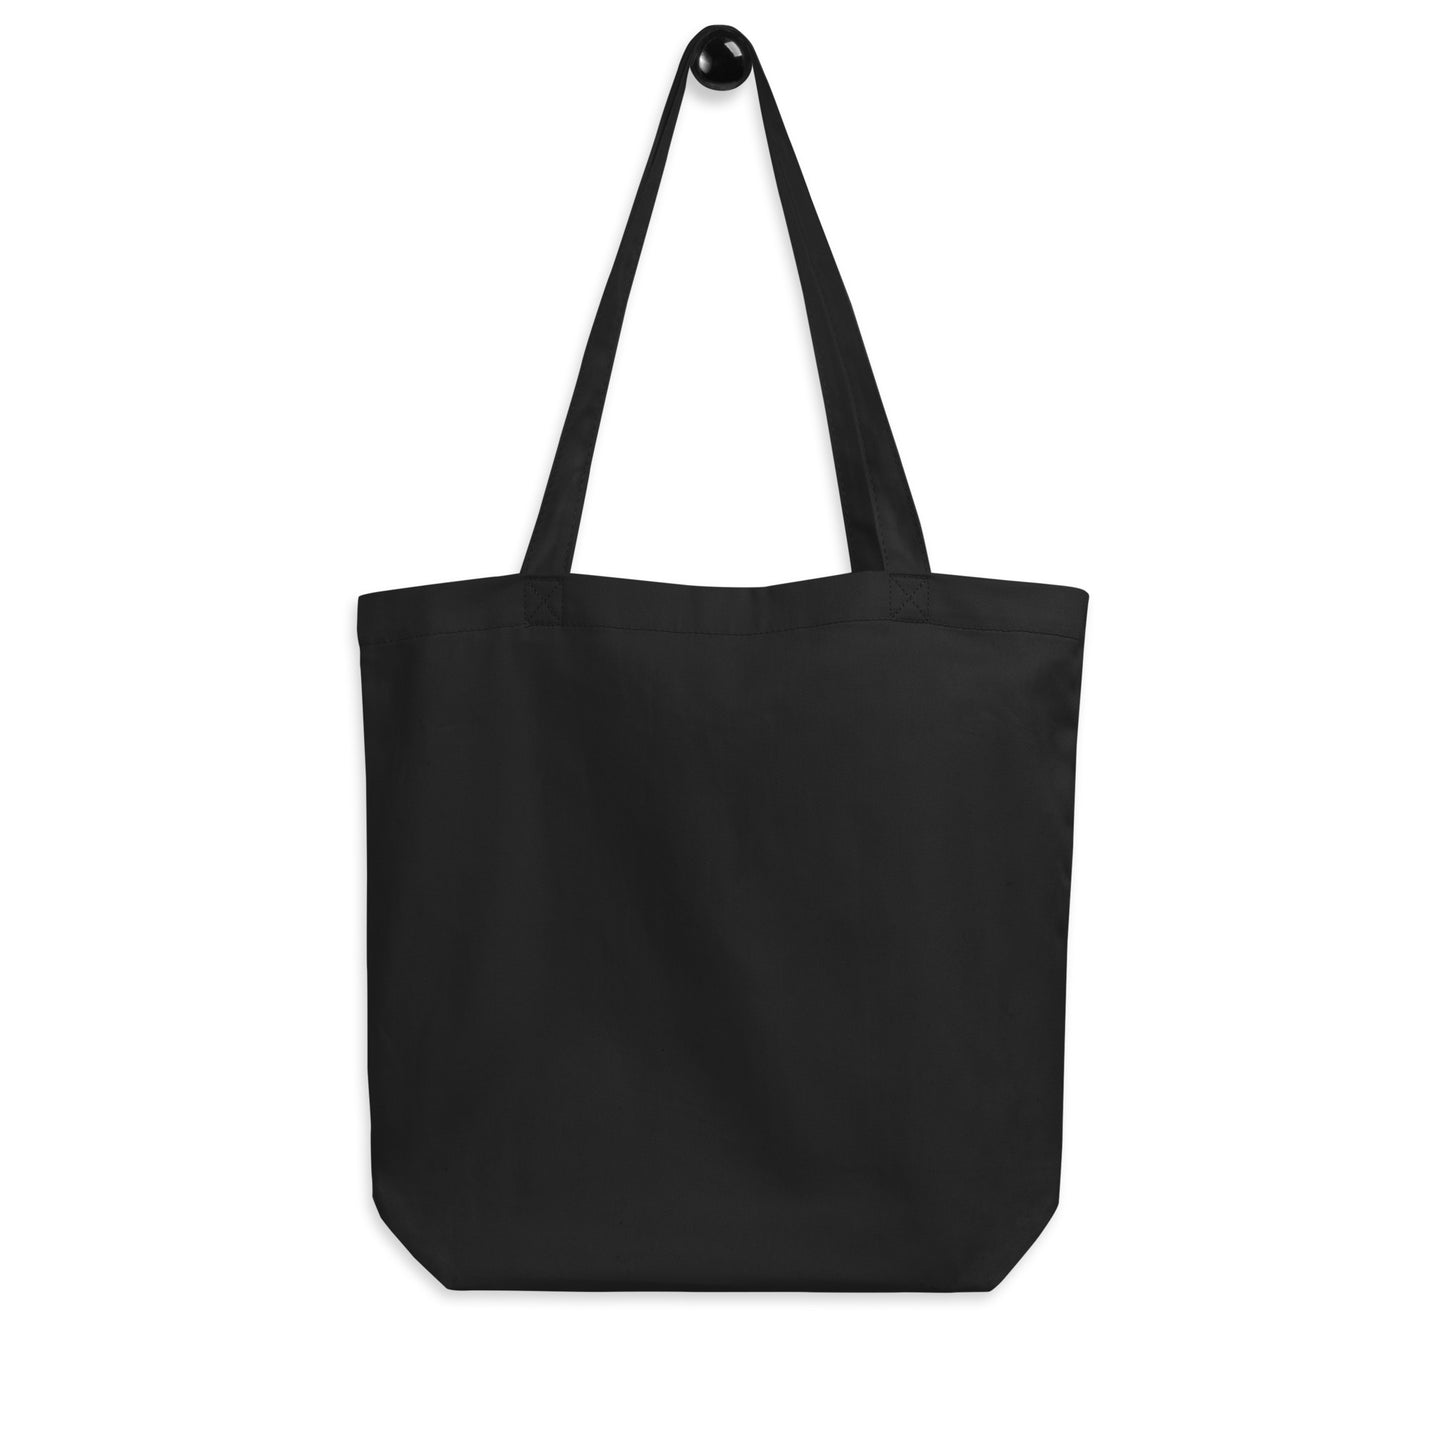 Unique Travel Gift Organic Tote - White Oval • TPA Tampa • YHM Designs - Image 05